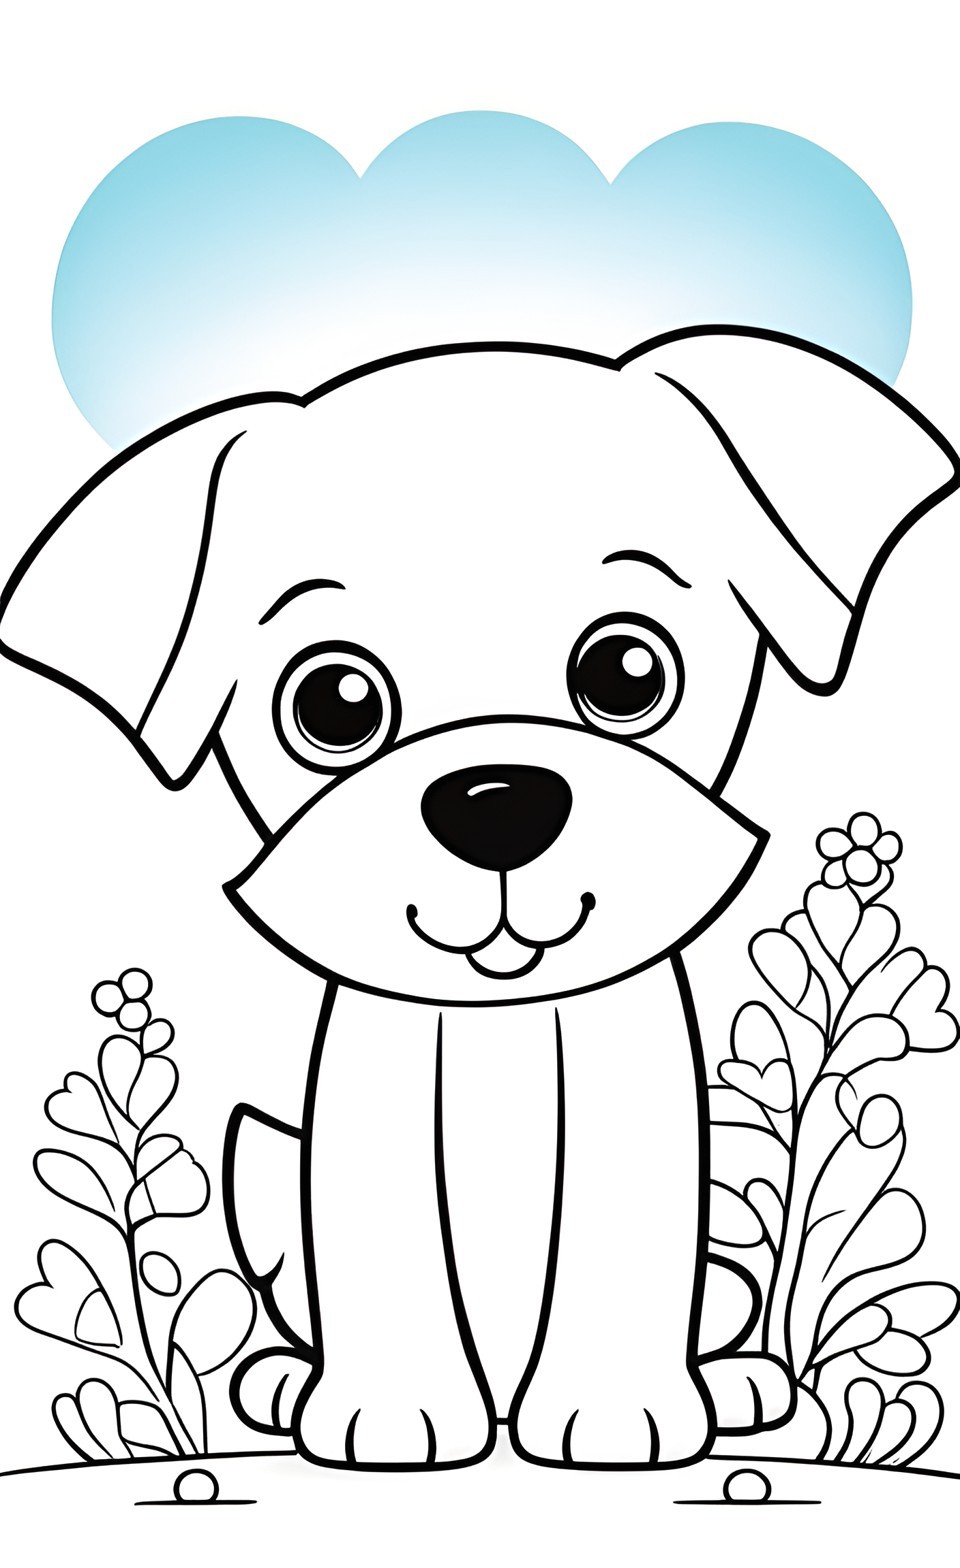 simple dog coloring pages for kids #4